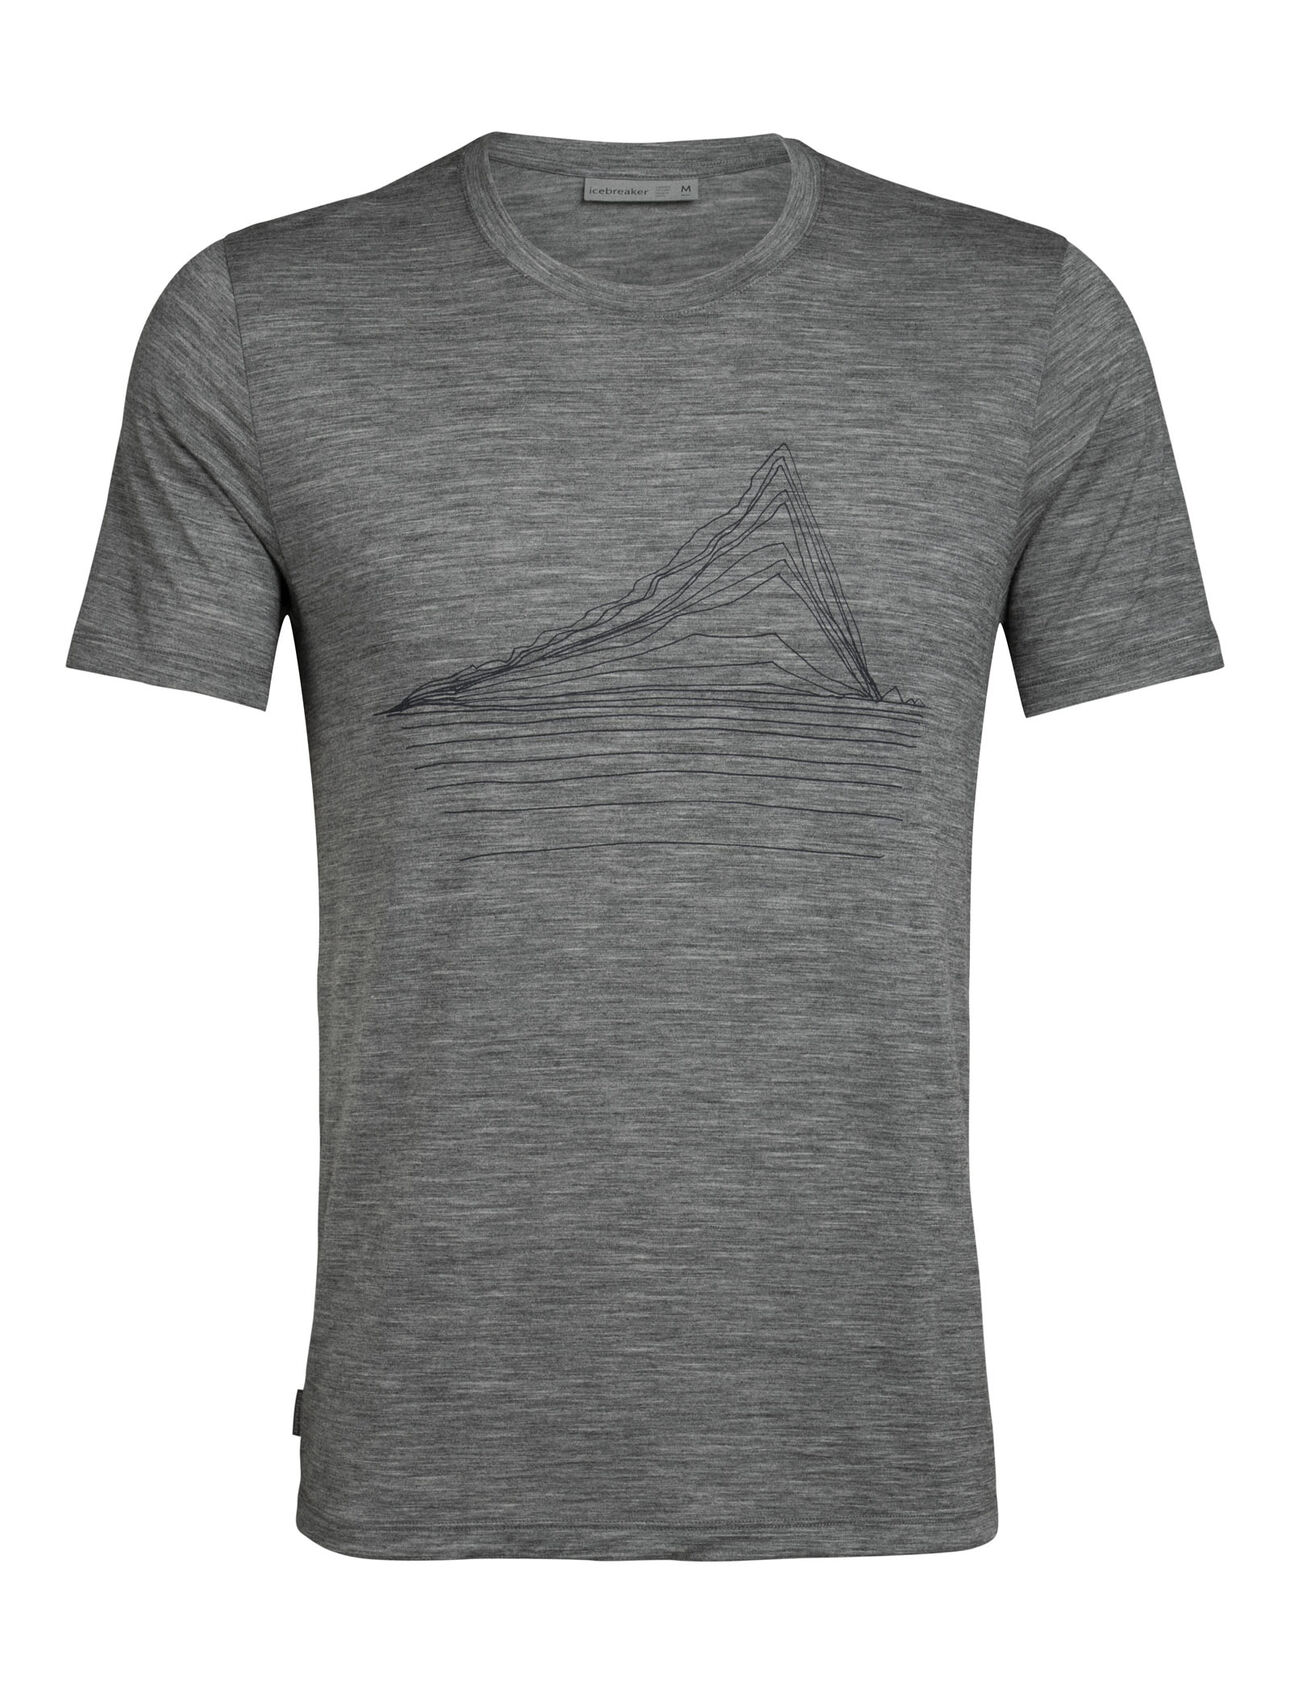 para hombre Merino Tech Lite Short Sleeve Crewe T-Shirt Heating Up Our most versatile tech tee, in breathable, odor-resistant merino wool with a slight stretch. Artist William Carden-Horton creates a striking image of glacial sea ice in his iconic line-drawing style.